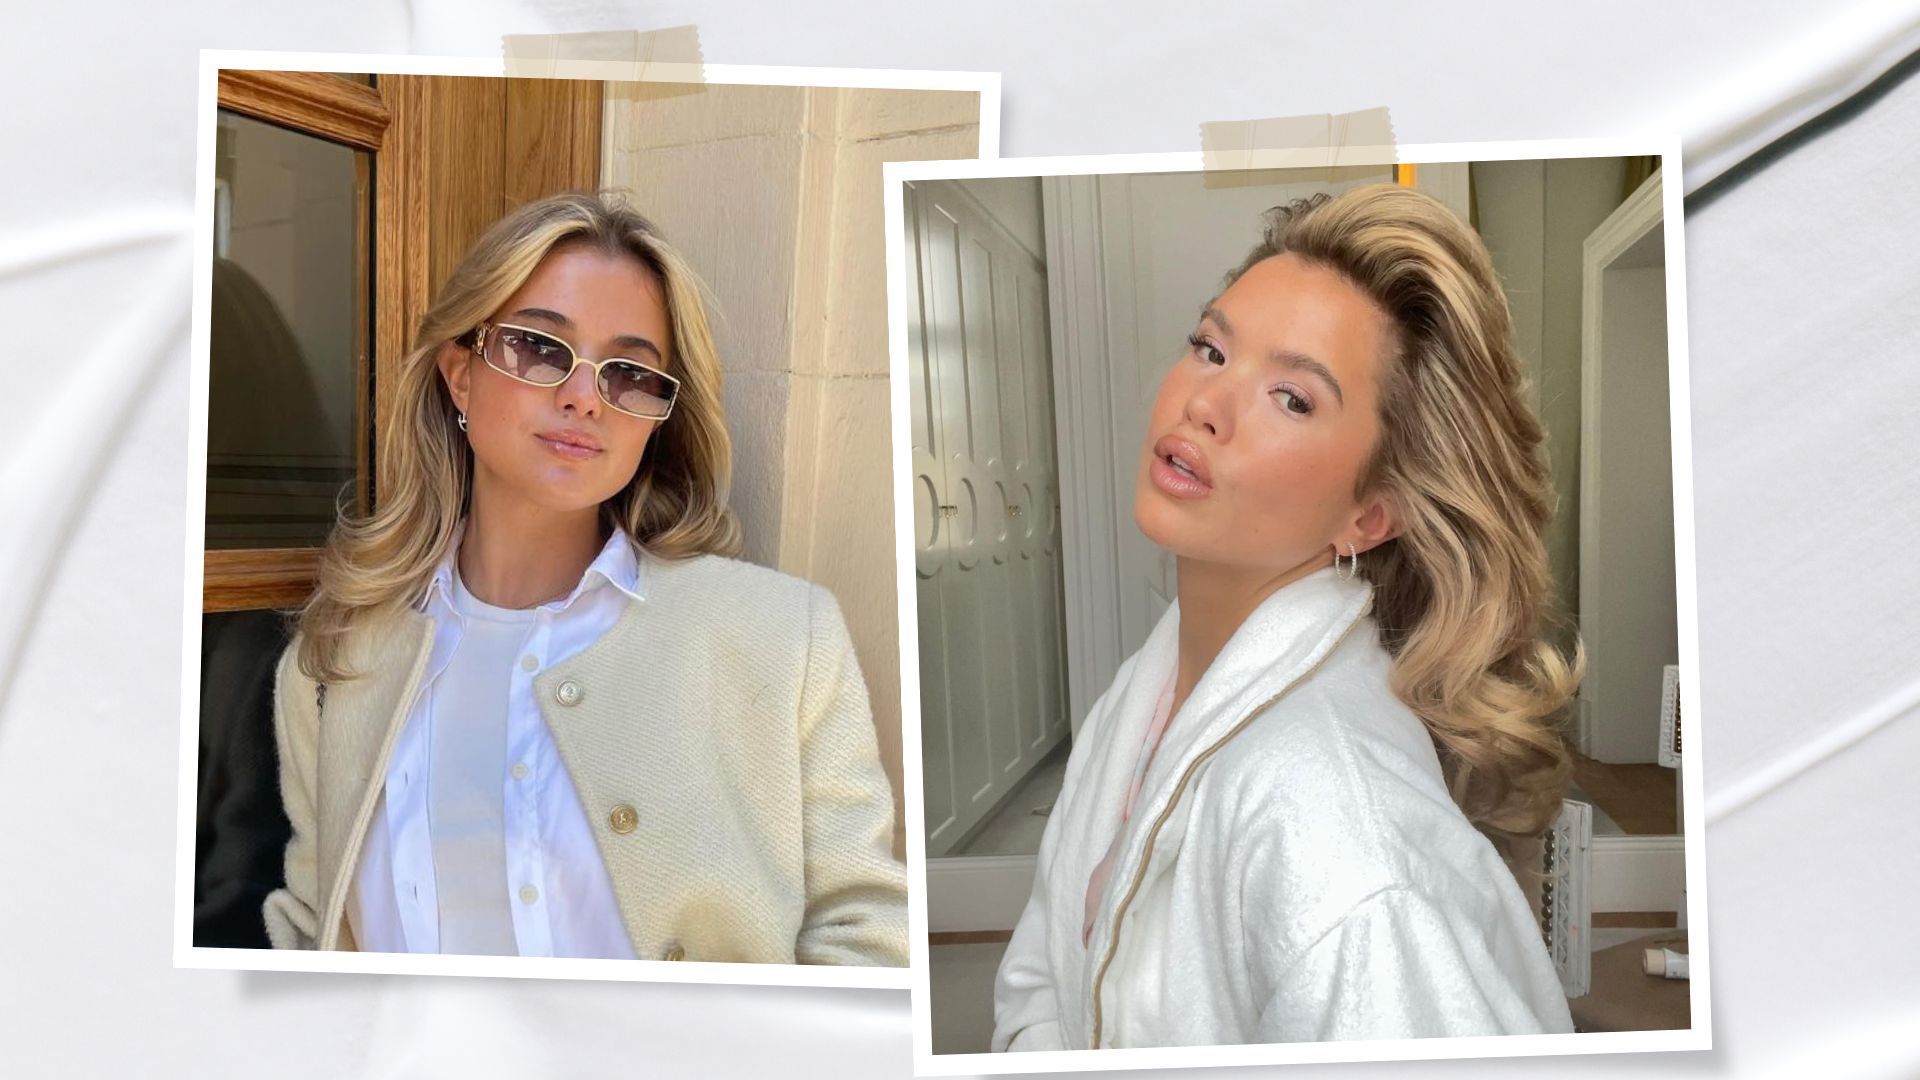 Two images of influencer Matilda Djerf 